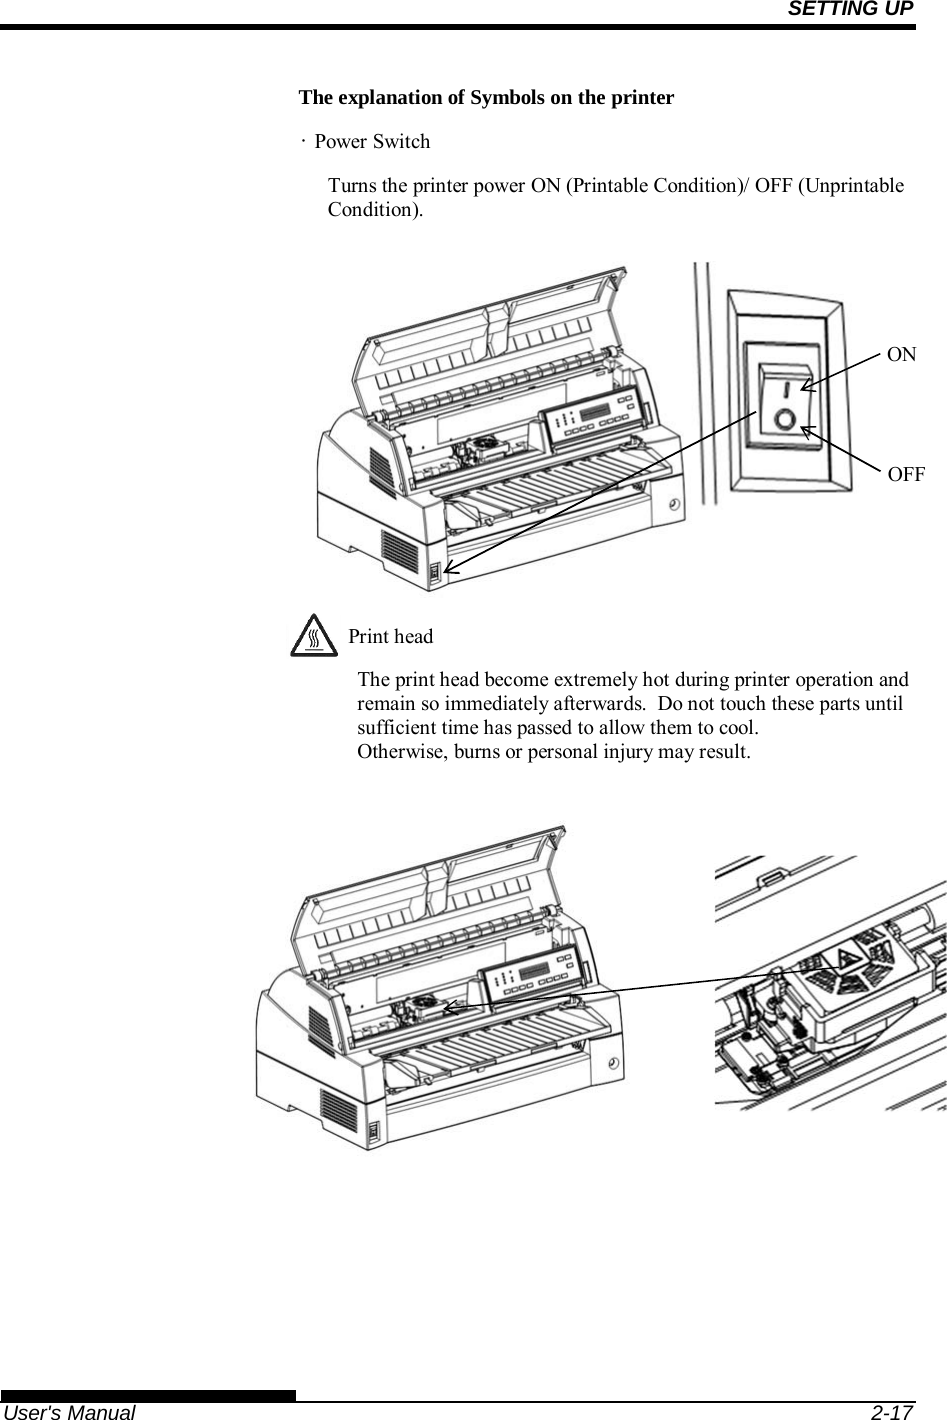 SETTING UP   User&apos;s Manual  2-17 The explanation of Symbols on the printer • Power Switch Turns the printer power ON (Printable Condition)/ OFF (Unprintable Condition).           Print head The print head become extremely hot during printer operation and remain so immediately afterwards.  Do not touch these parts until sufficient time has passed to allow them to cool. Otherwise, burns or personal injury may result.        ON OFF 